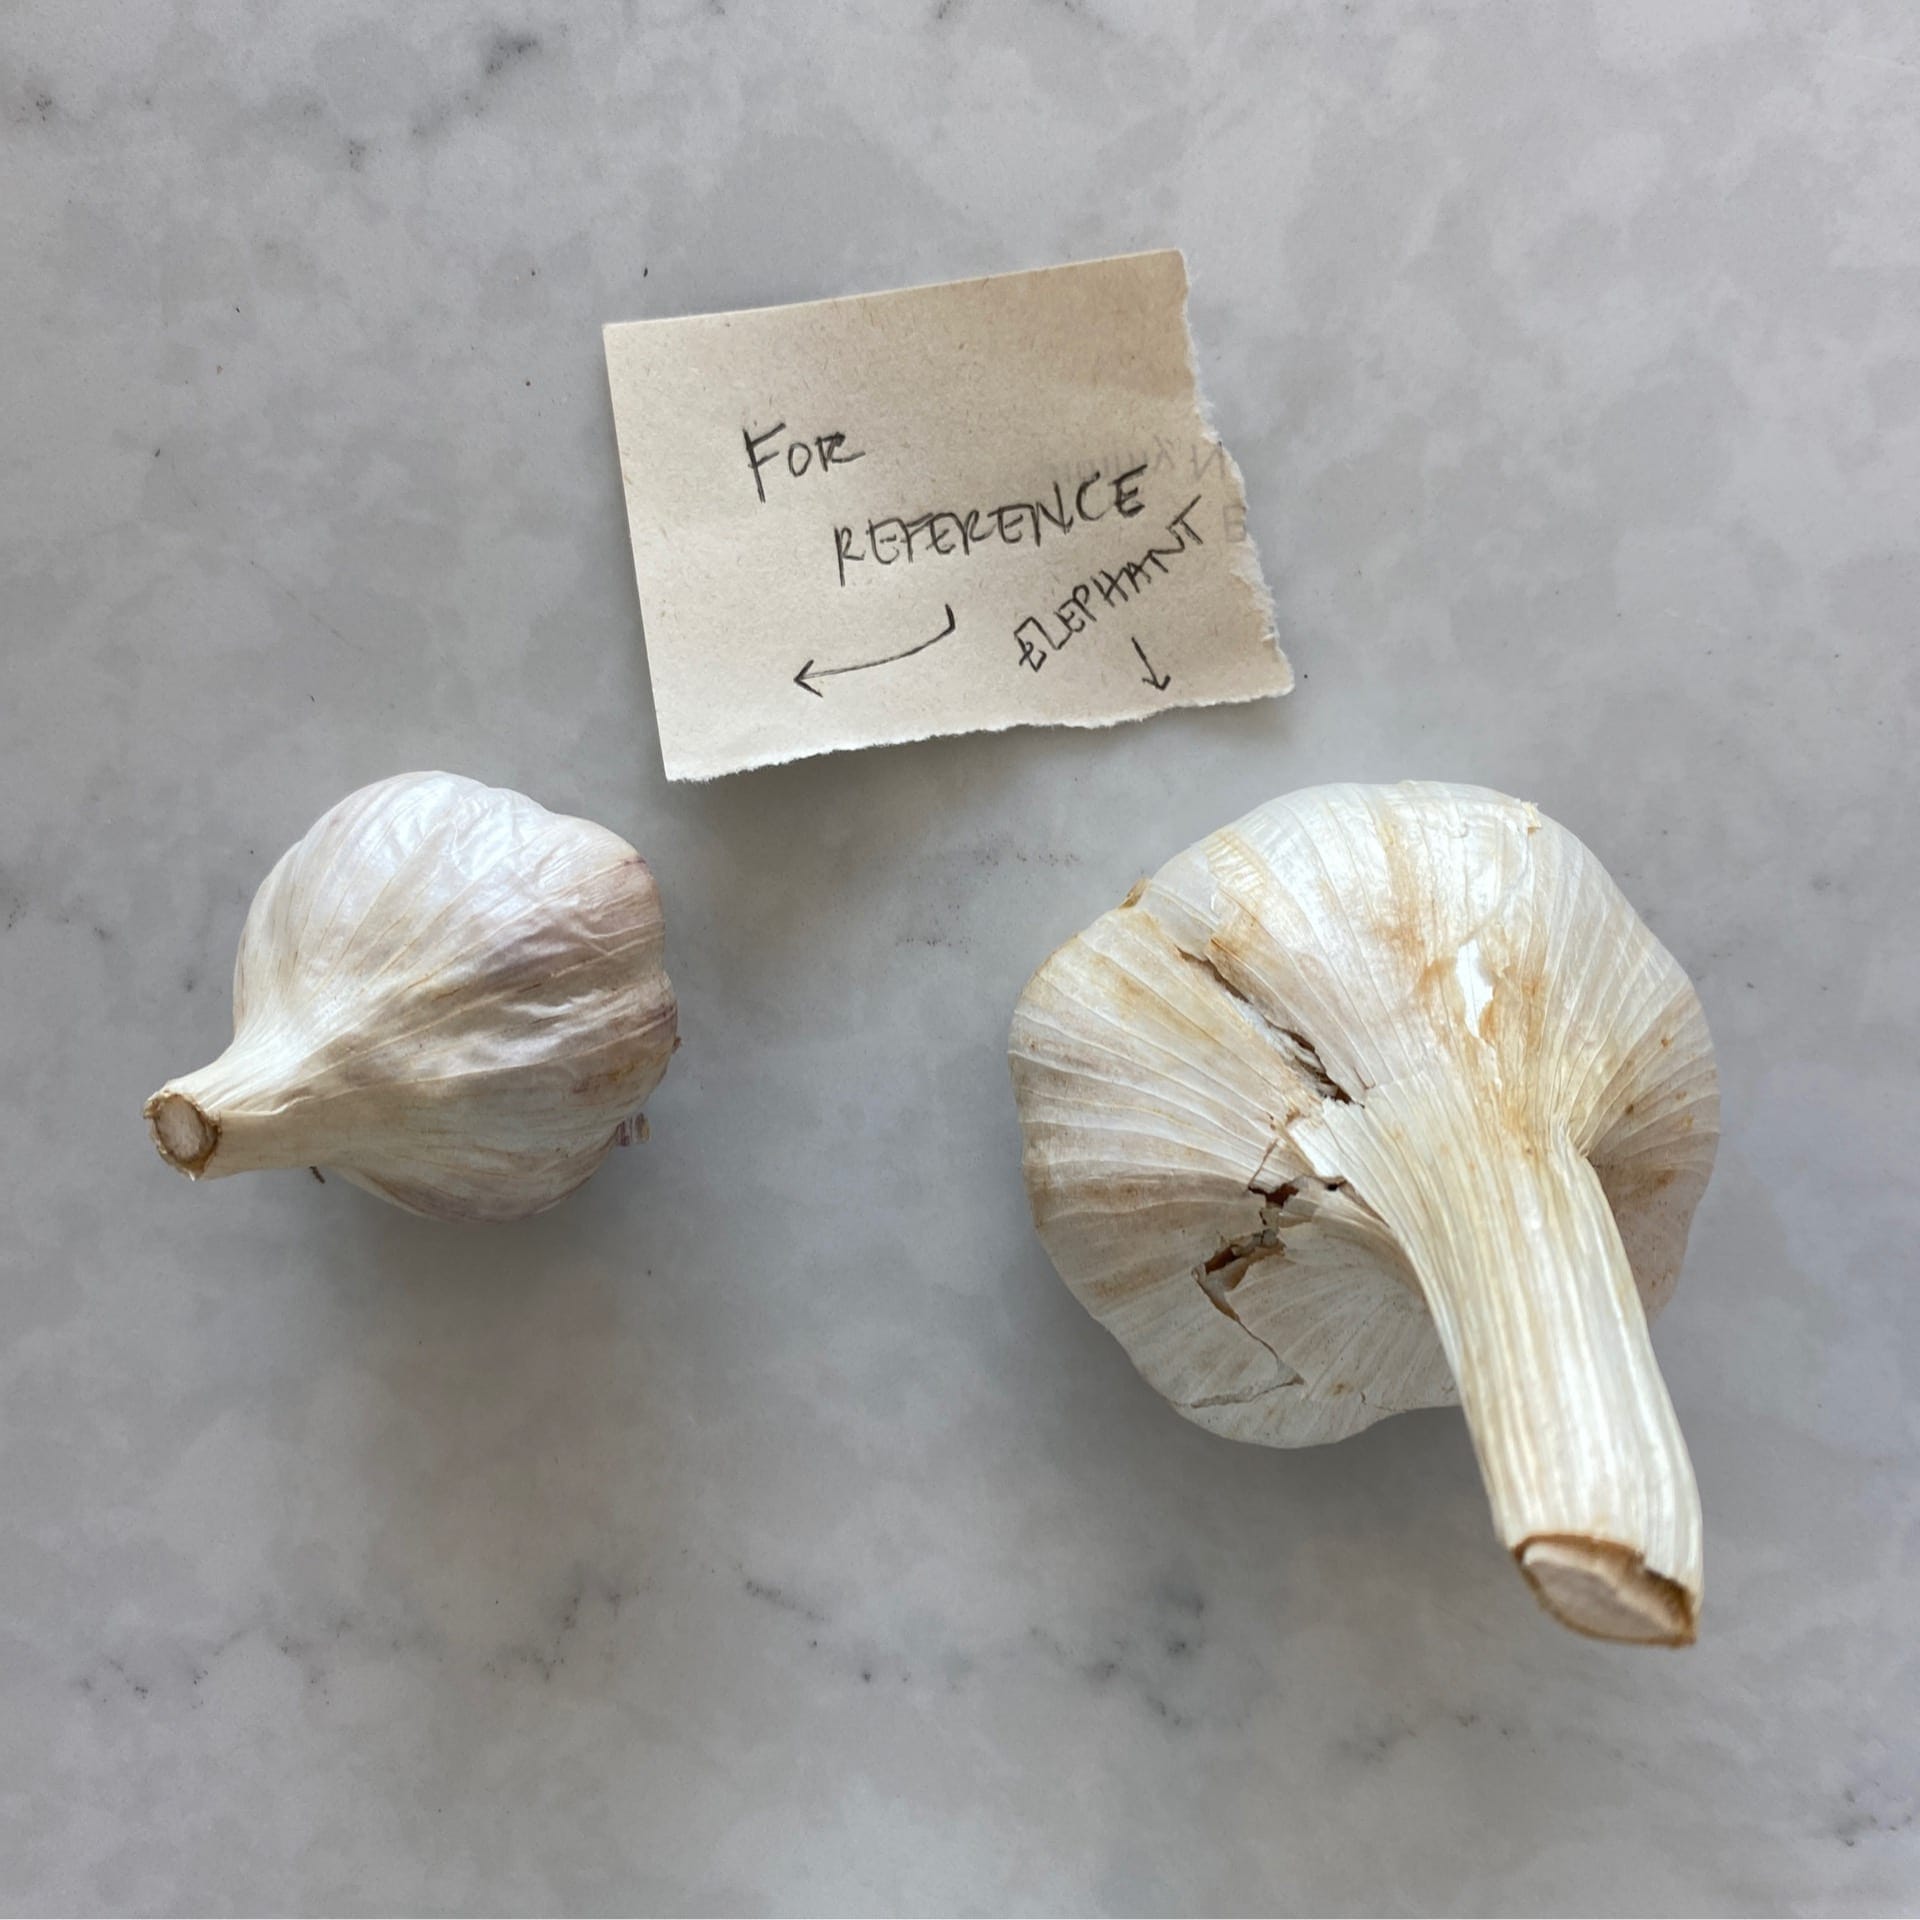 sold out elephant garlic